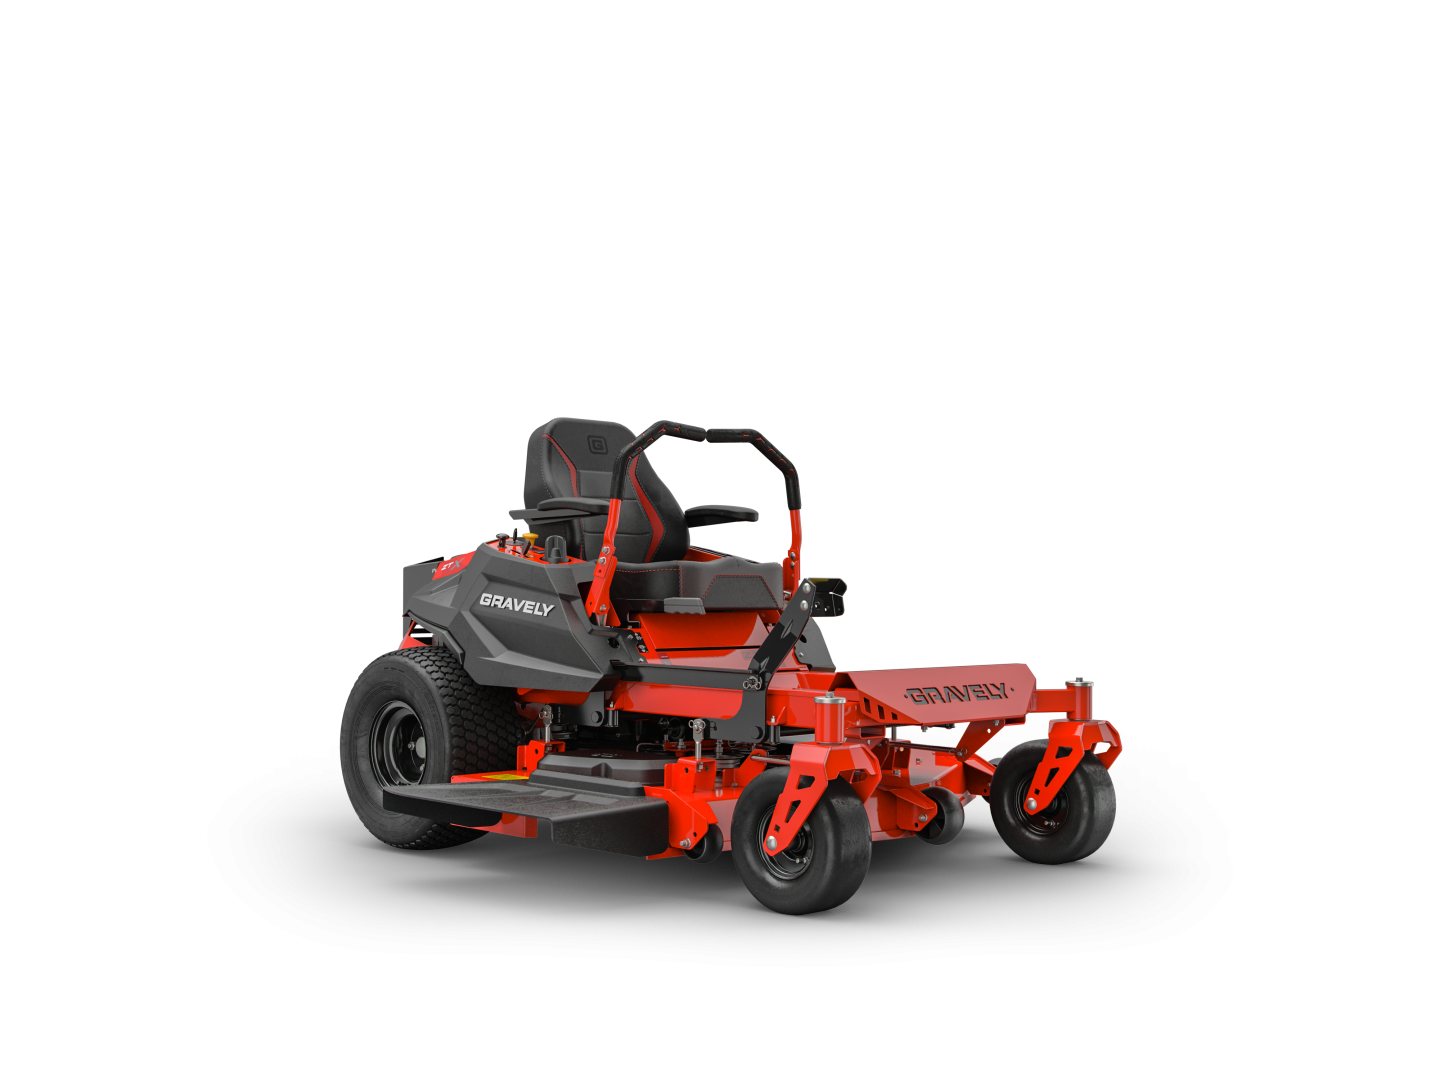 Product Name & SKU (Template Lawn Equipment)